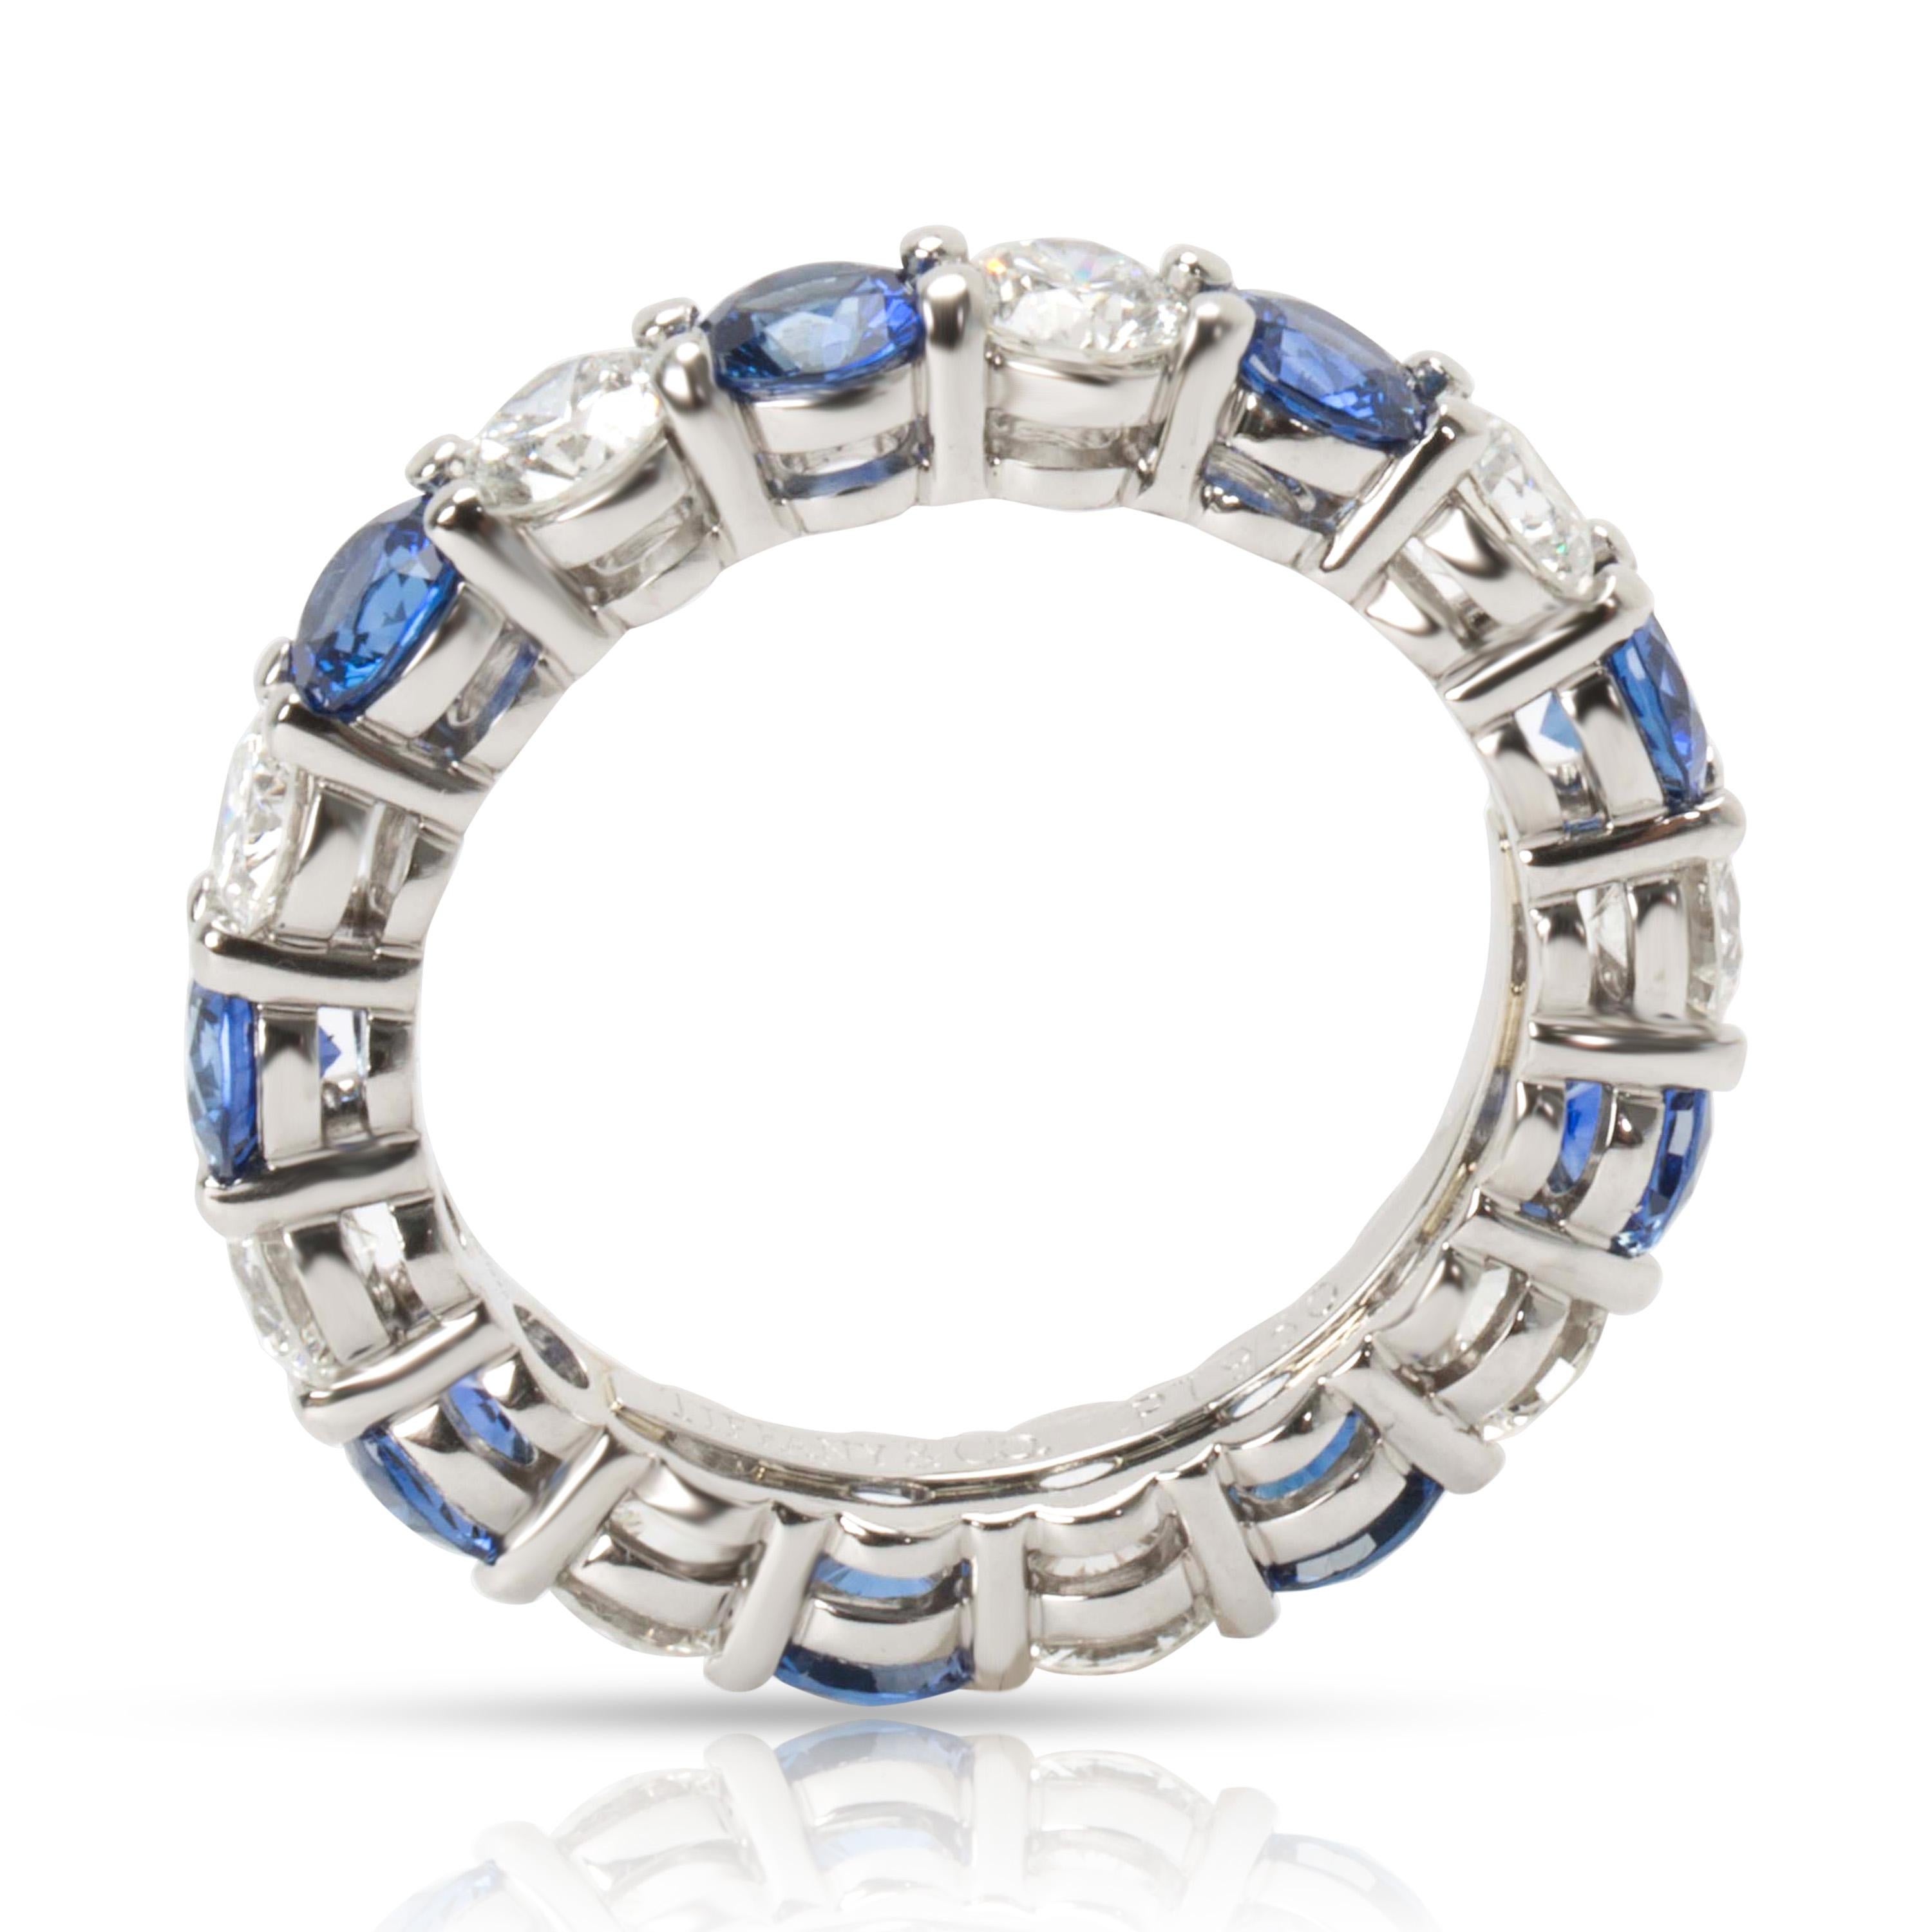 Round Cut Tiffany & Co. Large Embrace Diamond and Sapphire Band in Platinum '3.24 Carat'